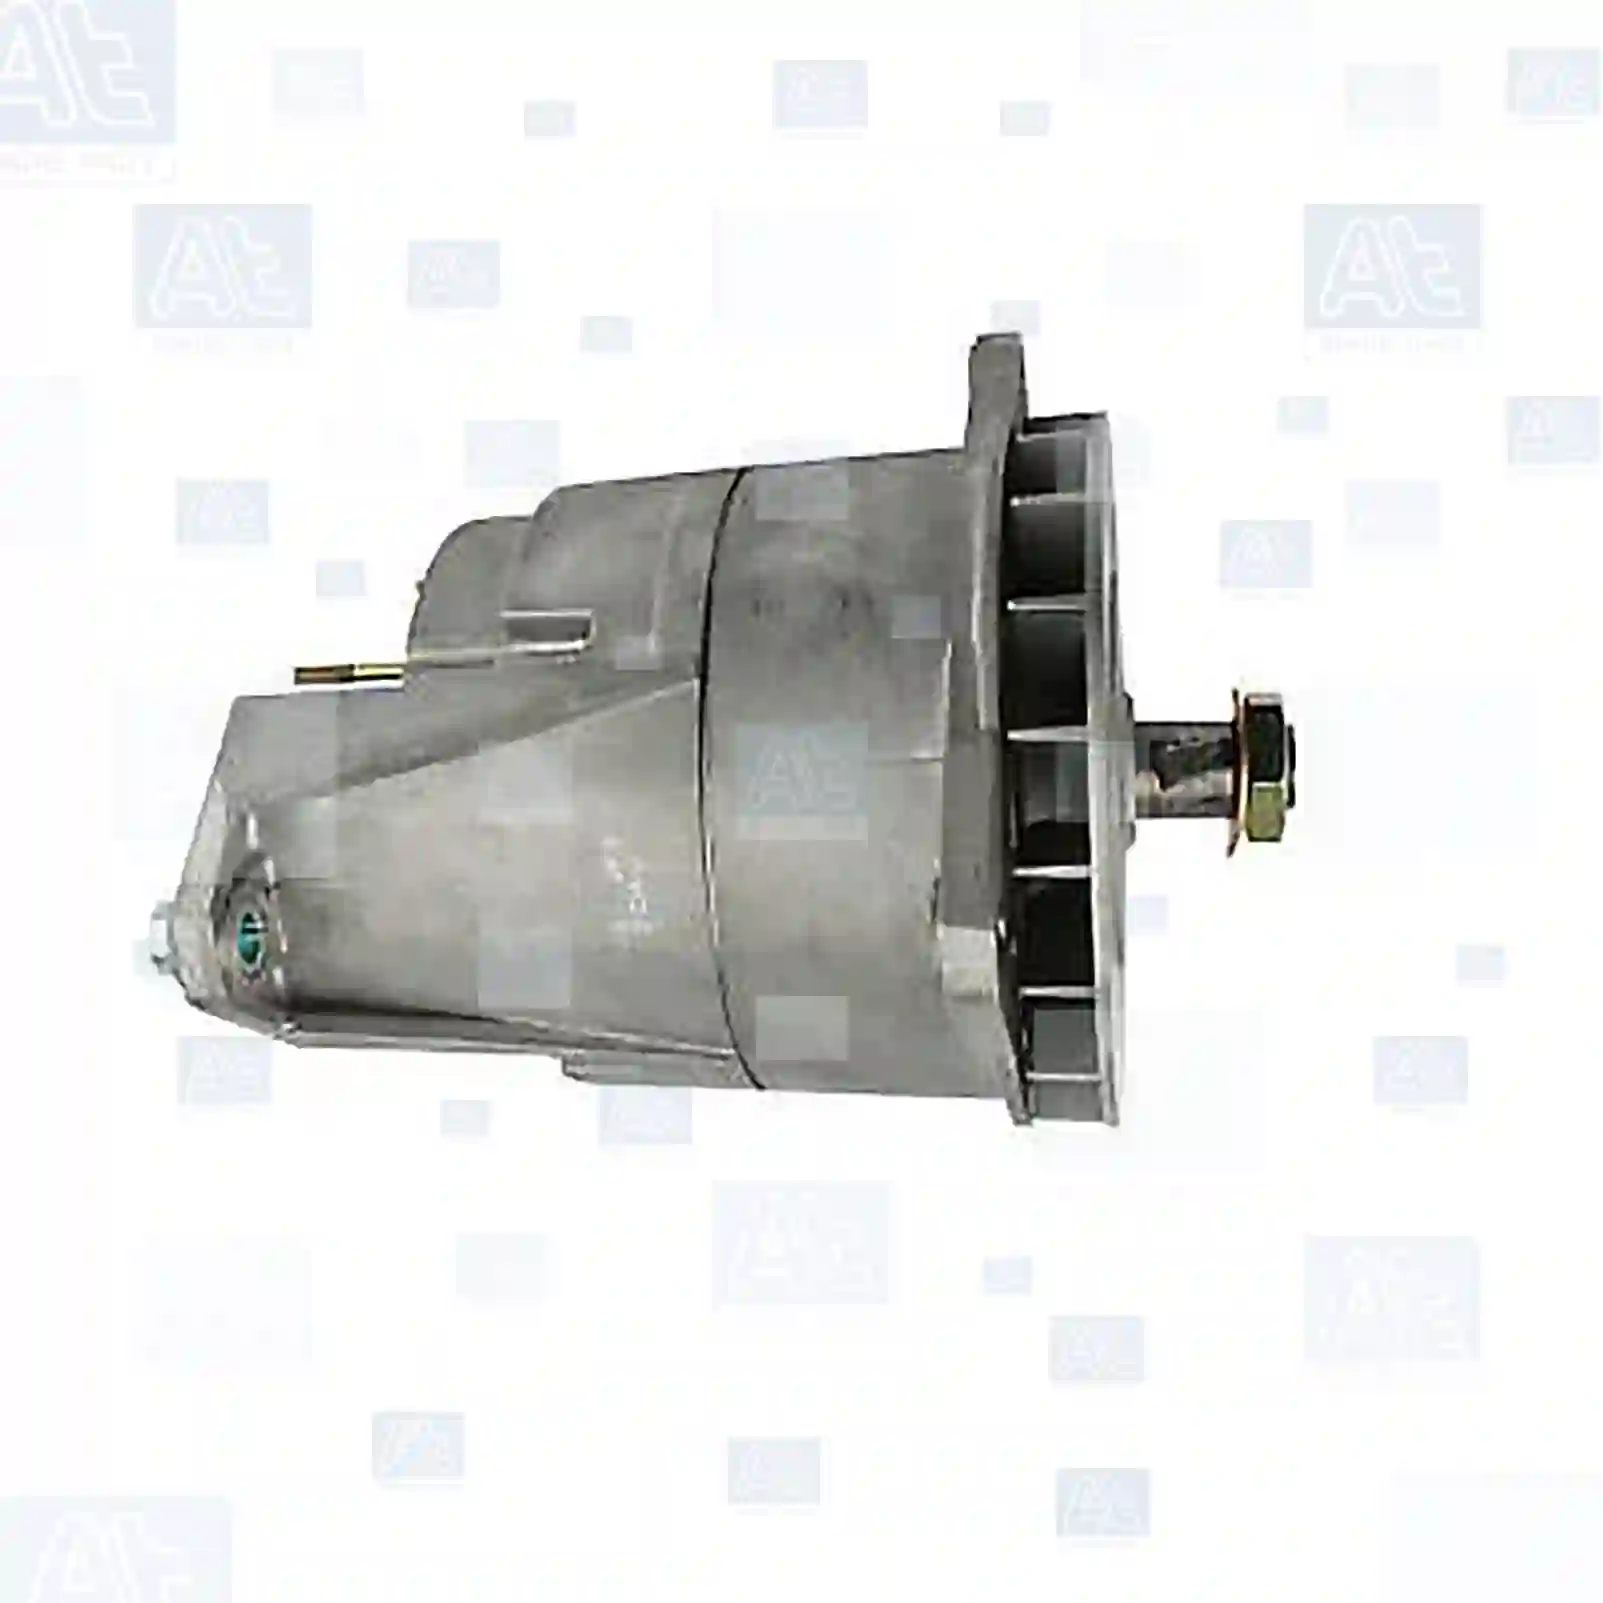 Alternator, at no 77710133, oem no: 3283809, 1244090, 1244090R, 420247, 666754, D666754, 01175597, 01179882, 01180040, 03042535, 01179882, 01180040, 1179882, 1180040, 42522949, 5040215288, 01173846, 01175597, 01179882, 01180440, 03042535, 6290101, 6290104, 420247, 571519, 10571520, 1179882, 1571519, 1571520, 160675, 420247, 460675, 571418, 571519, 571520, 666754, 7421345000, 1119154, 3032961, 8112284, 8113913, 8119913, 85000481, 85000717 At Spare Part | Engine, Accelerator Pedal, Camshaft, Connecting Rod, Crankcase, Crankshaft, Cylinder Head, Engine Suspension Mountings, Exhaust Manifold, Exhaust Gas Recirculation, Filter Kits, Flywheel Housing, General Overhaul Kits, Engine, Intake Manifold, Oil Cleaner, Oil Cooler, Oil Filter, Oil Pump, Oil Sump, Piston & Liner, Sensor & Switch, Timing Case, Turbocharger, Cooling System, Belt Tensioner, Coolant Filter, Coolant Pipe, Corrosion Prevention Agent, Drive, Expansion Tank, Fan, Intercooler, Monitors & Gauges, Radiator, Thermostat, V-Belt / Timing belt, Water Pump, Fuel System, Electronical Injector Unit, Feed Pump, Fuel Filter, cpl., Fuel Gauge Sender,  Fuel Line, Fuel Pump, Fuel Tank, Injection Line Kit, Injection Pump, Exhaust System, Clutch & Pedal, Gearbox, Propeller Shaft, Axles, Brake System, Hubs & Wheels, Suspension, Leaf Spring, Universal Parts / Accessories, Steering, Electrical System, Cabin Alternator, at no 77710133, oem no: 3283809, 1244090, 1244090R, 420247, 666754, D666754, 01175597, 01179882, 01180040, 03042535, 01179882, 01180040, 1179882, 1180040, 42522949, 5040215288, 01173846, 01175597, 01179882, 01180440, 03042535, 6290101, 6290104, 420247, 571519, 10571520, 1179882, 1571519, 1571520, 160675, 420247, 460675, 571418, 571519, 571520, 666754, 7421345000, 1119154, 3032961, 8112284, 8113913, 8119913, 85000481, 85000717 At Spare Part | Engine, Accelerator Pedal, Camshaft, Connecting Rod, Crankcase, Crankshaft, Cylinder Head, Engine Suspension Mountings, Exhaust Manifold, Exhaust Gas Recirculation, Filter Kits, Flywheel Housing, General Overhaul Kits, Engine, Intake Manifold, Oil Cleaner, Oil Cooler, Oil Filter, Oil Pump, Oil Sump, Piston & Liner, Sensor & Switch, Timing Case, Turbocharger, Cooling System, Belt Tensioner, Coolant Filter, Coolant Pipe, Corrosion Prevention Agent, Drive, Expansion Tank, Fan, Intercooler, Monitors & Gauges, Radiator, Thermostat, V-Belt / Timing belt, Water Pump, Fuel System, Electronical Injector Unit, Feed Pump, Fuel Filter, cpl., Fuel Gauge Sender,  Fuel Line, Fuel Pump, Fuel Tank, Injection Line Kit, Injection Pump, Exhaust System, Clutch & Pedal, Gearbox, Propeller Shaft, Axles, Brake System, Hubs & Wheels, Suspension, Leaf Spring, Universal Parts / Accessories, Steering, Electrical System, Cabin